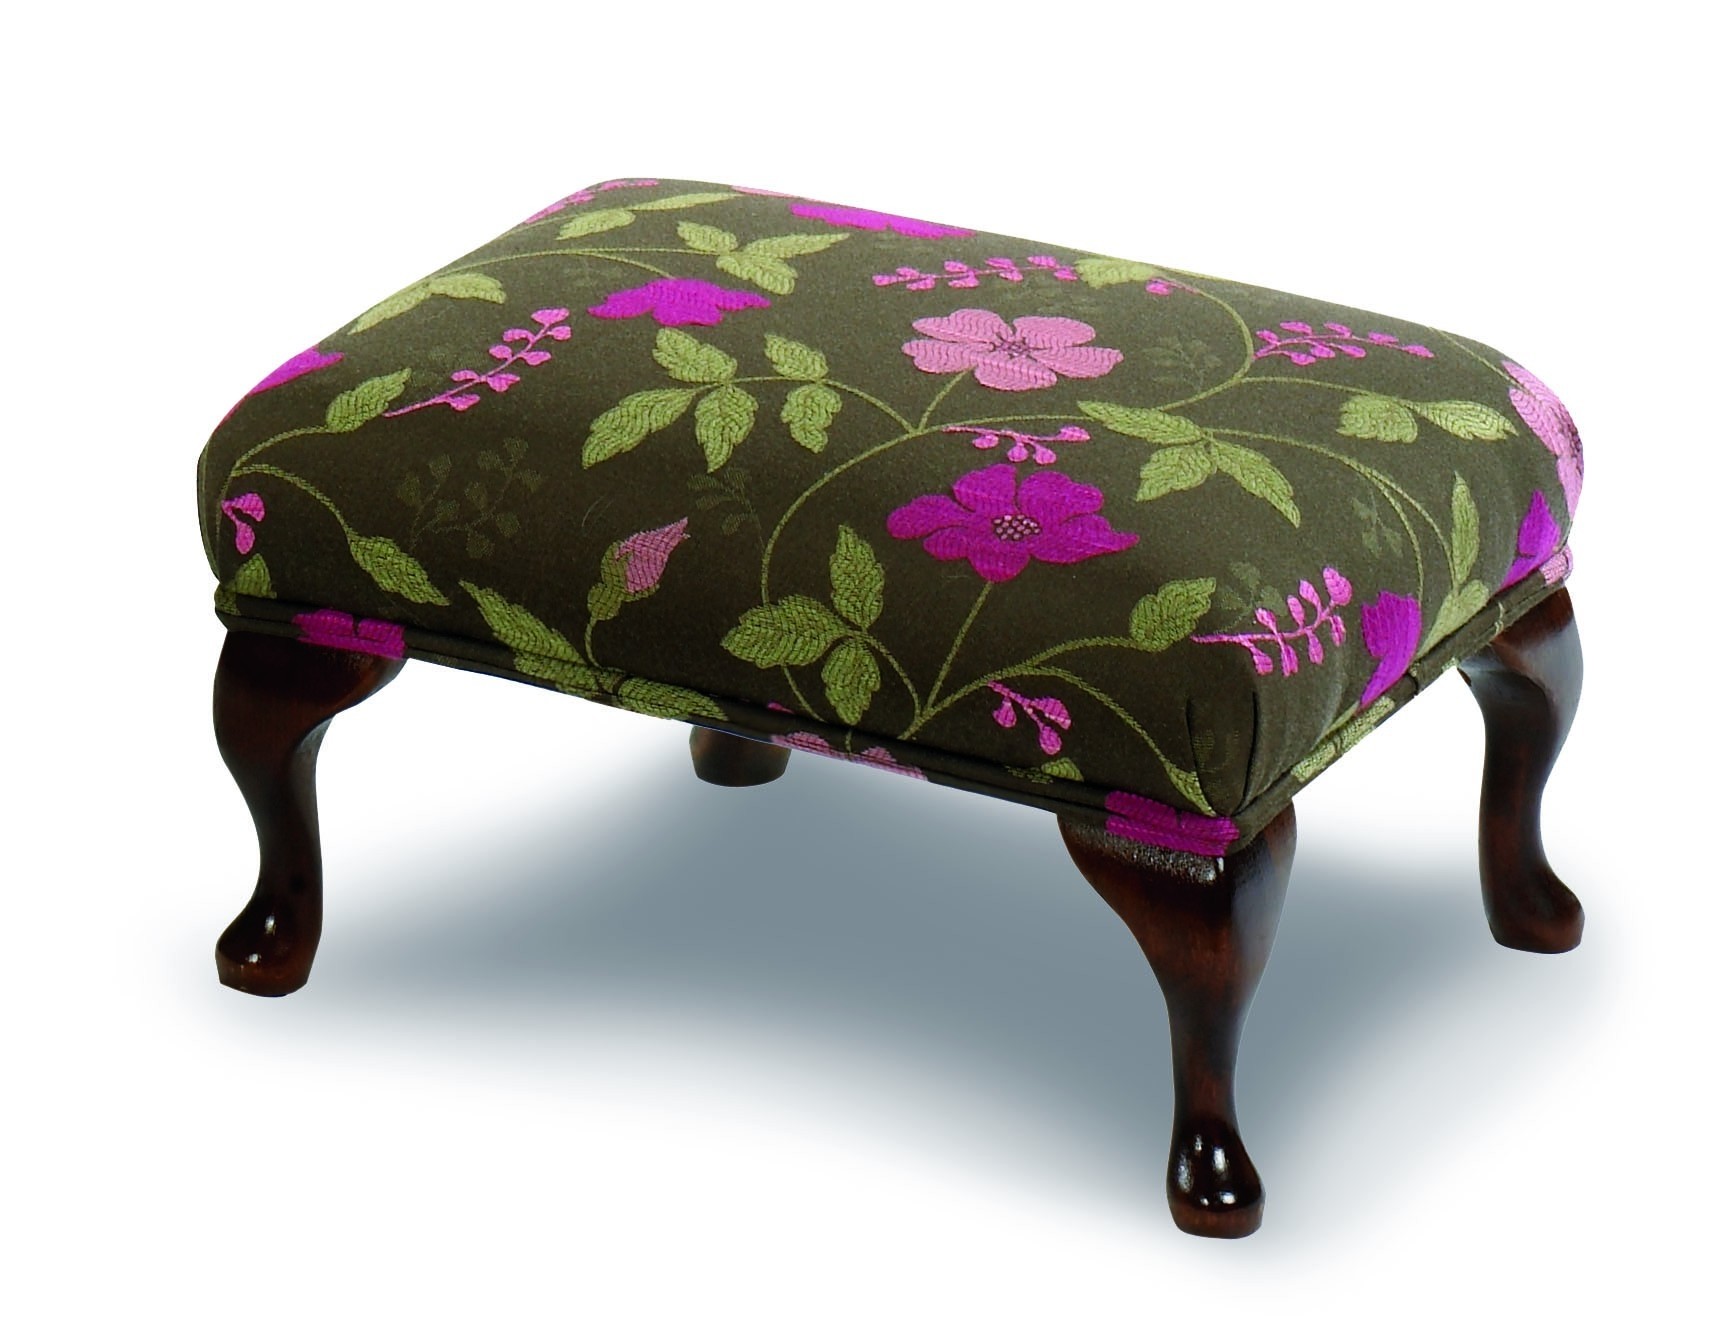 Small footstool home category furniture bespoke small footstool